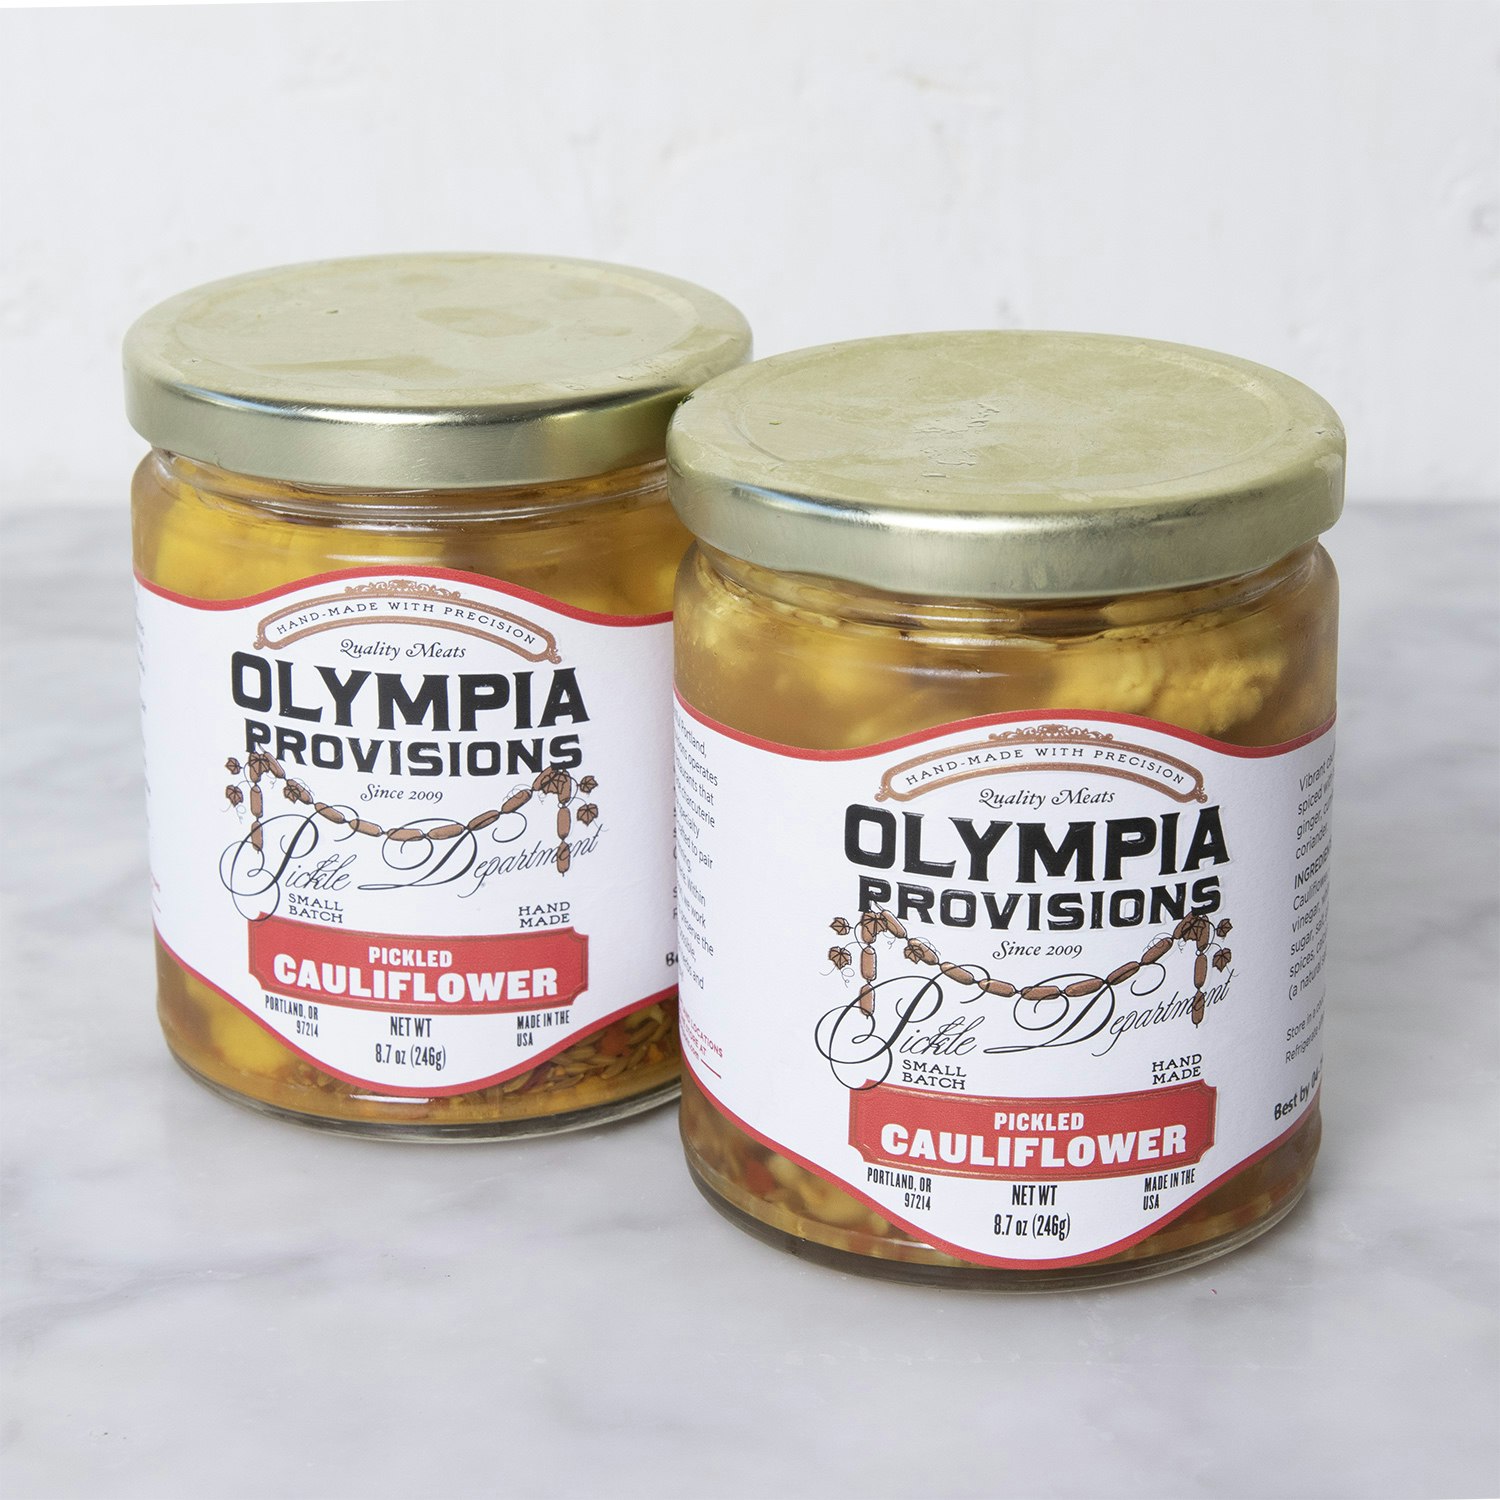 Olympia Provisions Pickled Cauliflower specialty foods